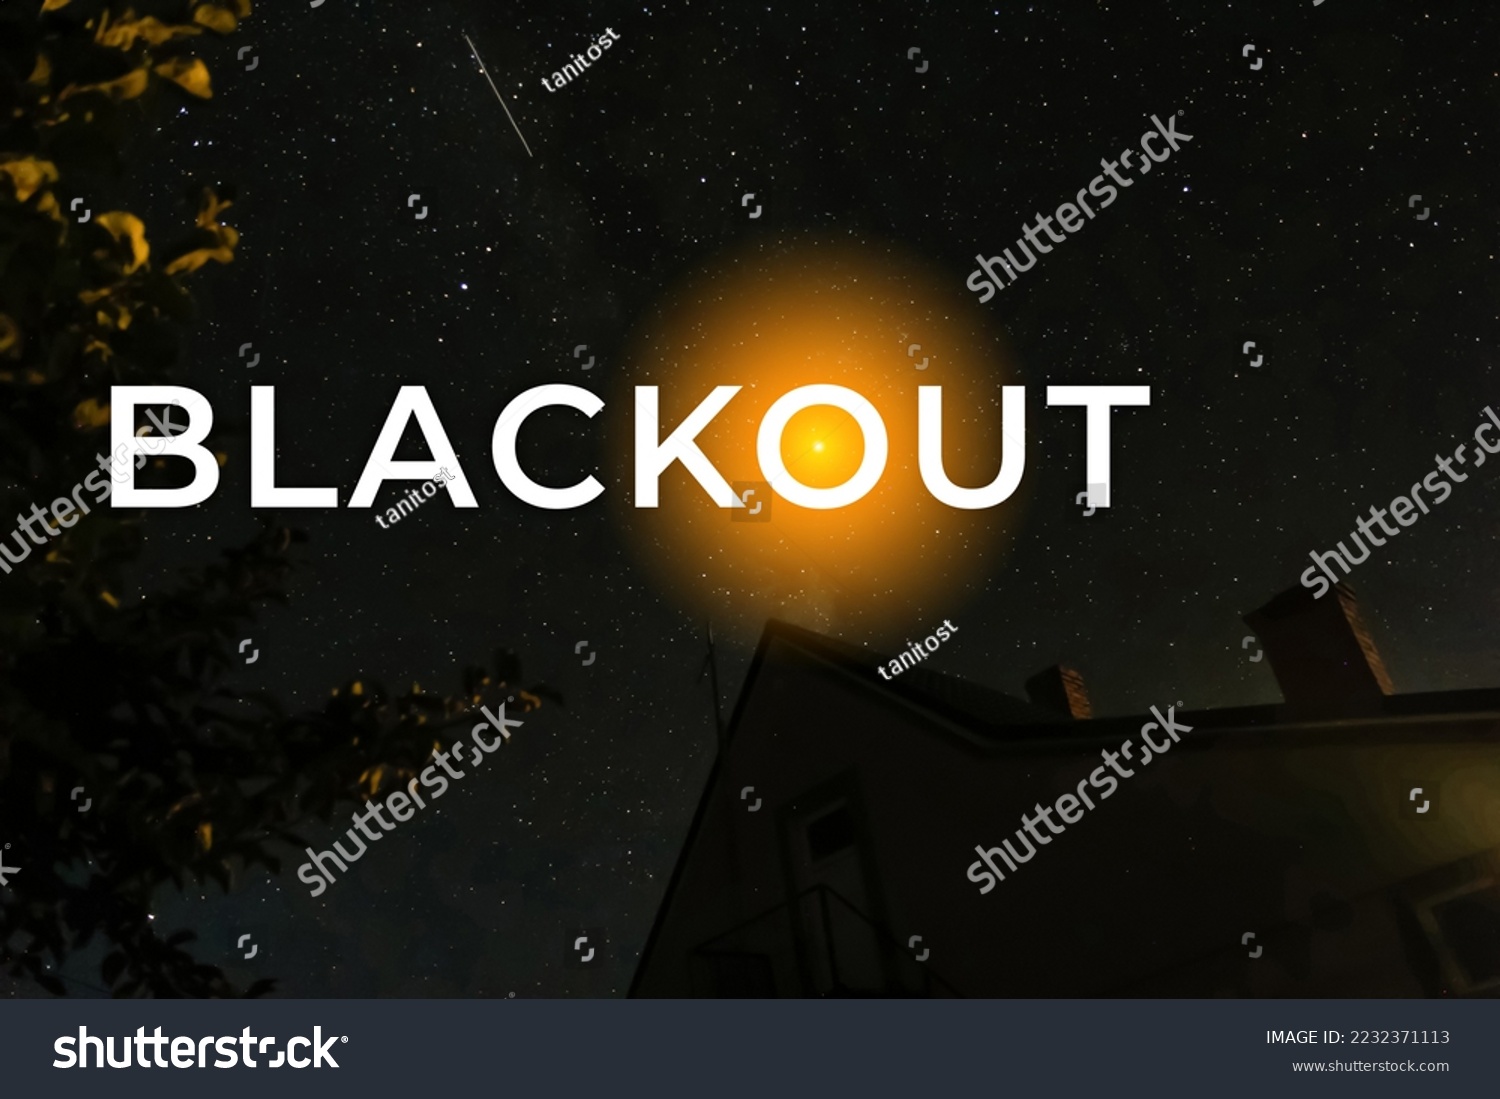 Blackout – power grid overloaded. Blackout concept. Earth hour. Burning flame candle and power lines on background. Energy crisis. Dark starry night.  #2232371113